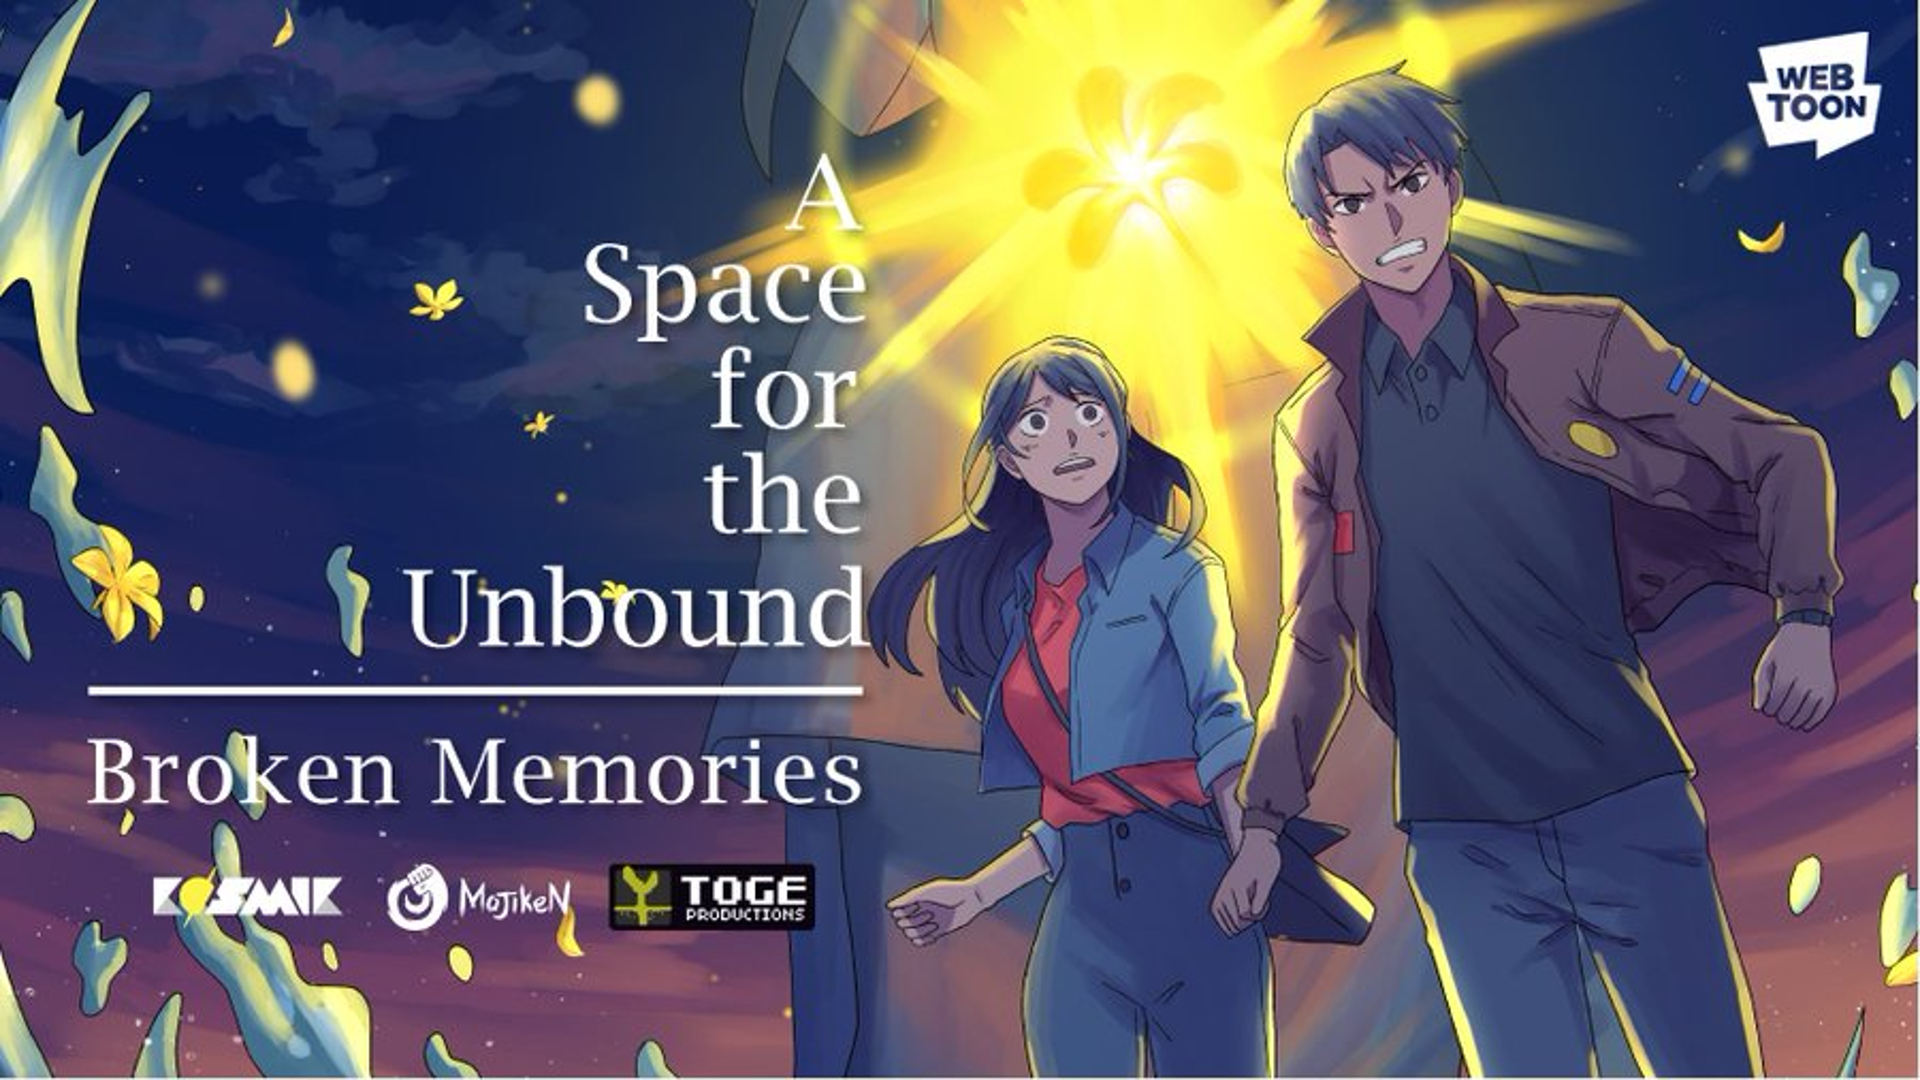 Indonesia Made A Space For The Unbound Is Getting Its Own Webtoon